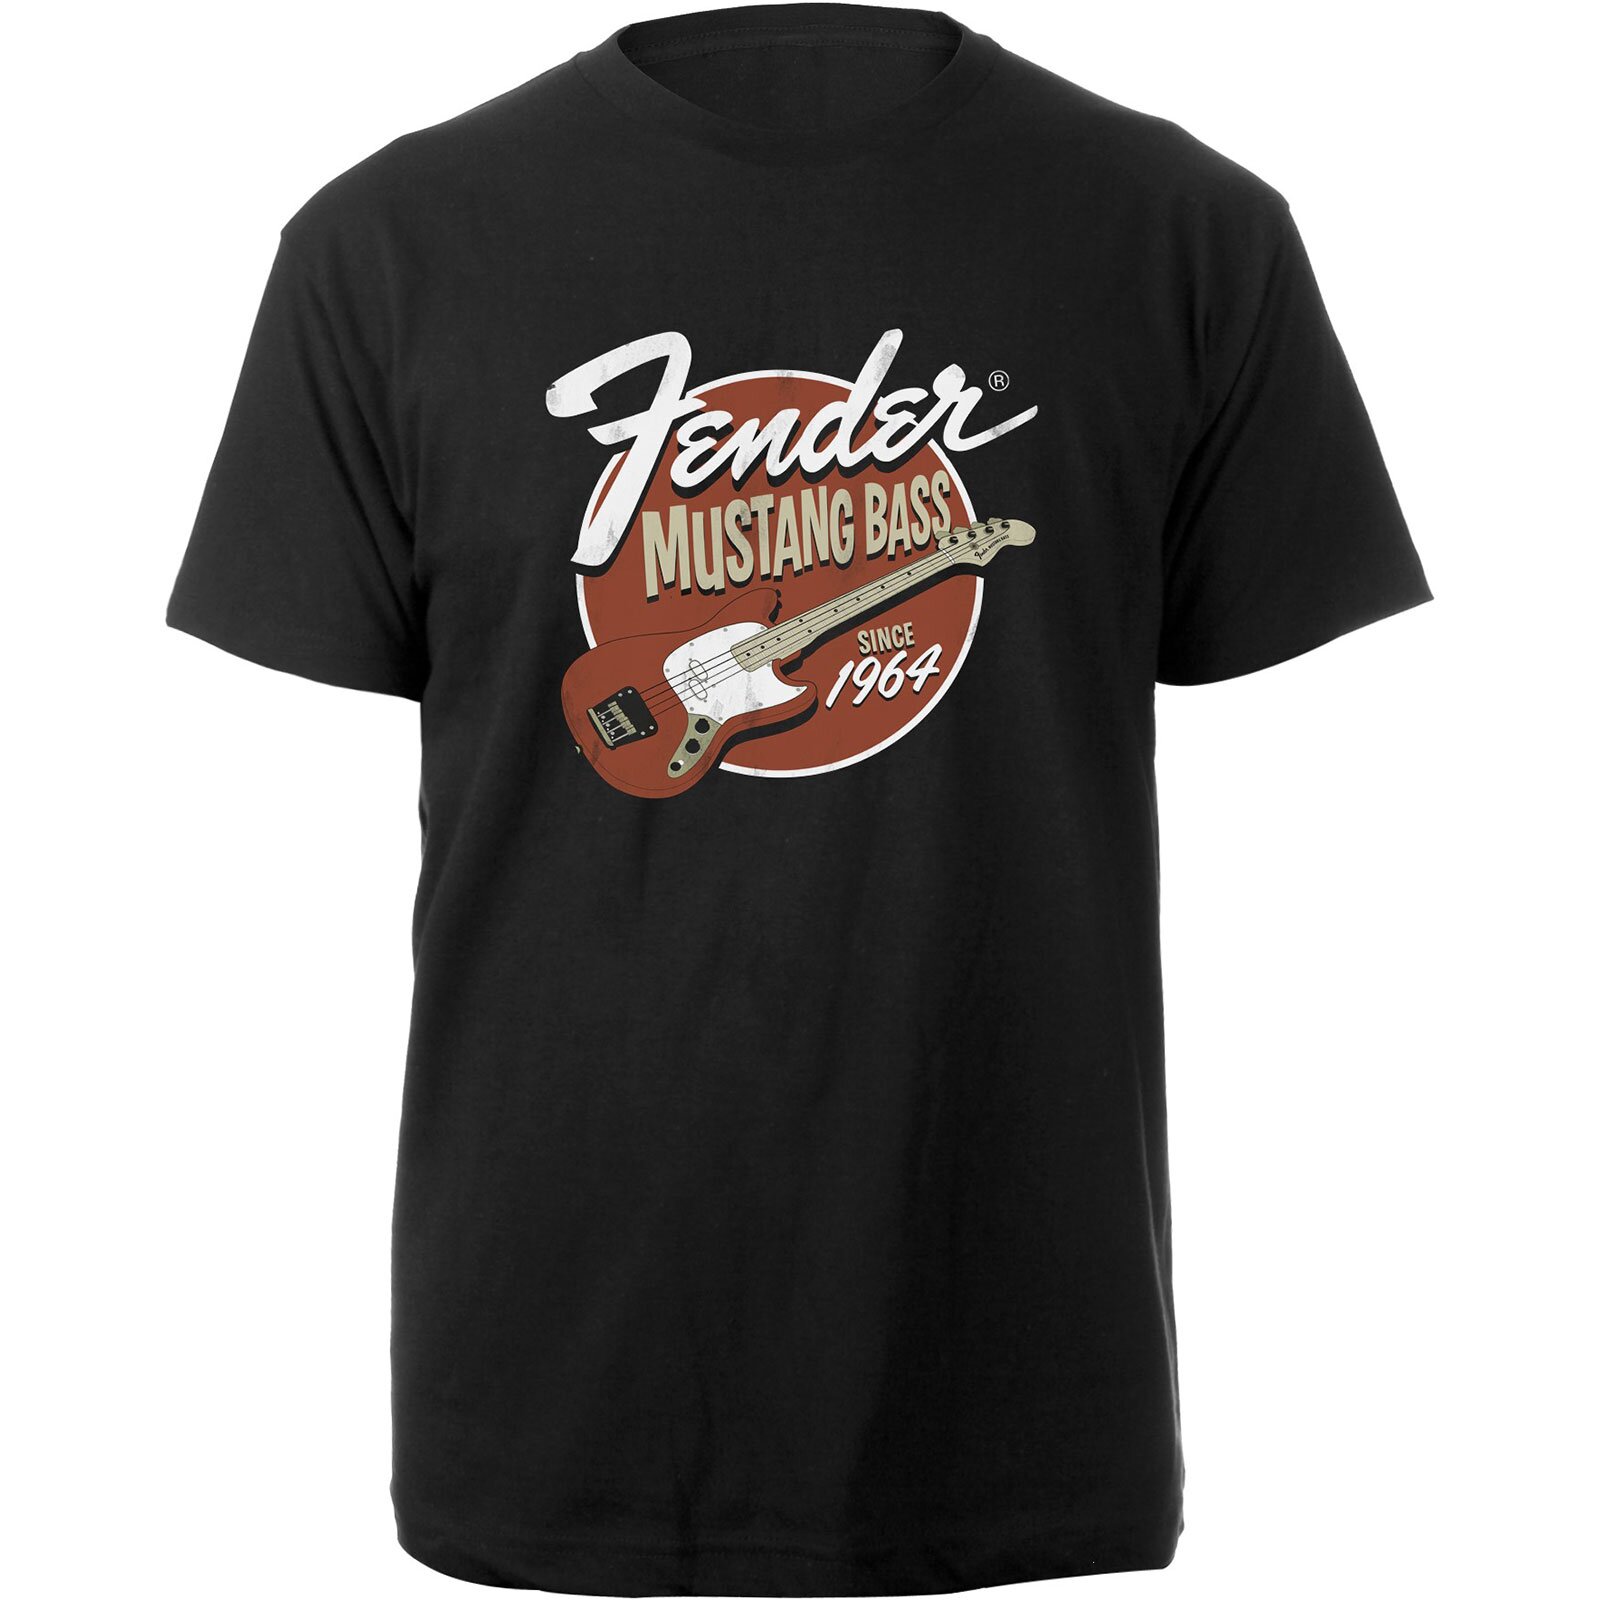 Rockoff Fender Mustang Bass ack T-Shirt Size M : photo 1